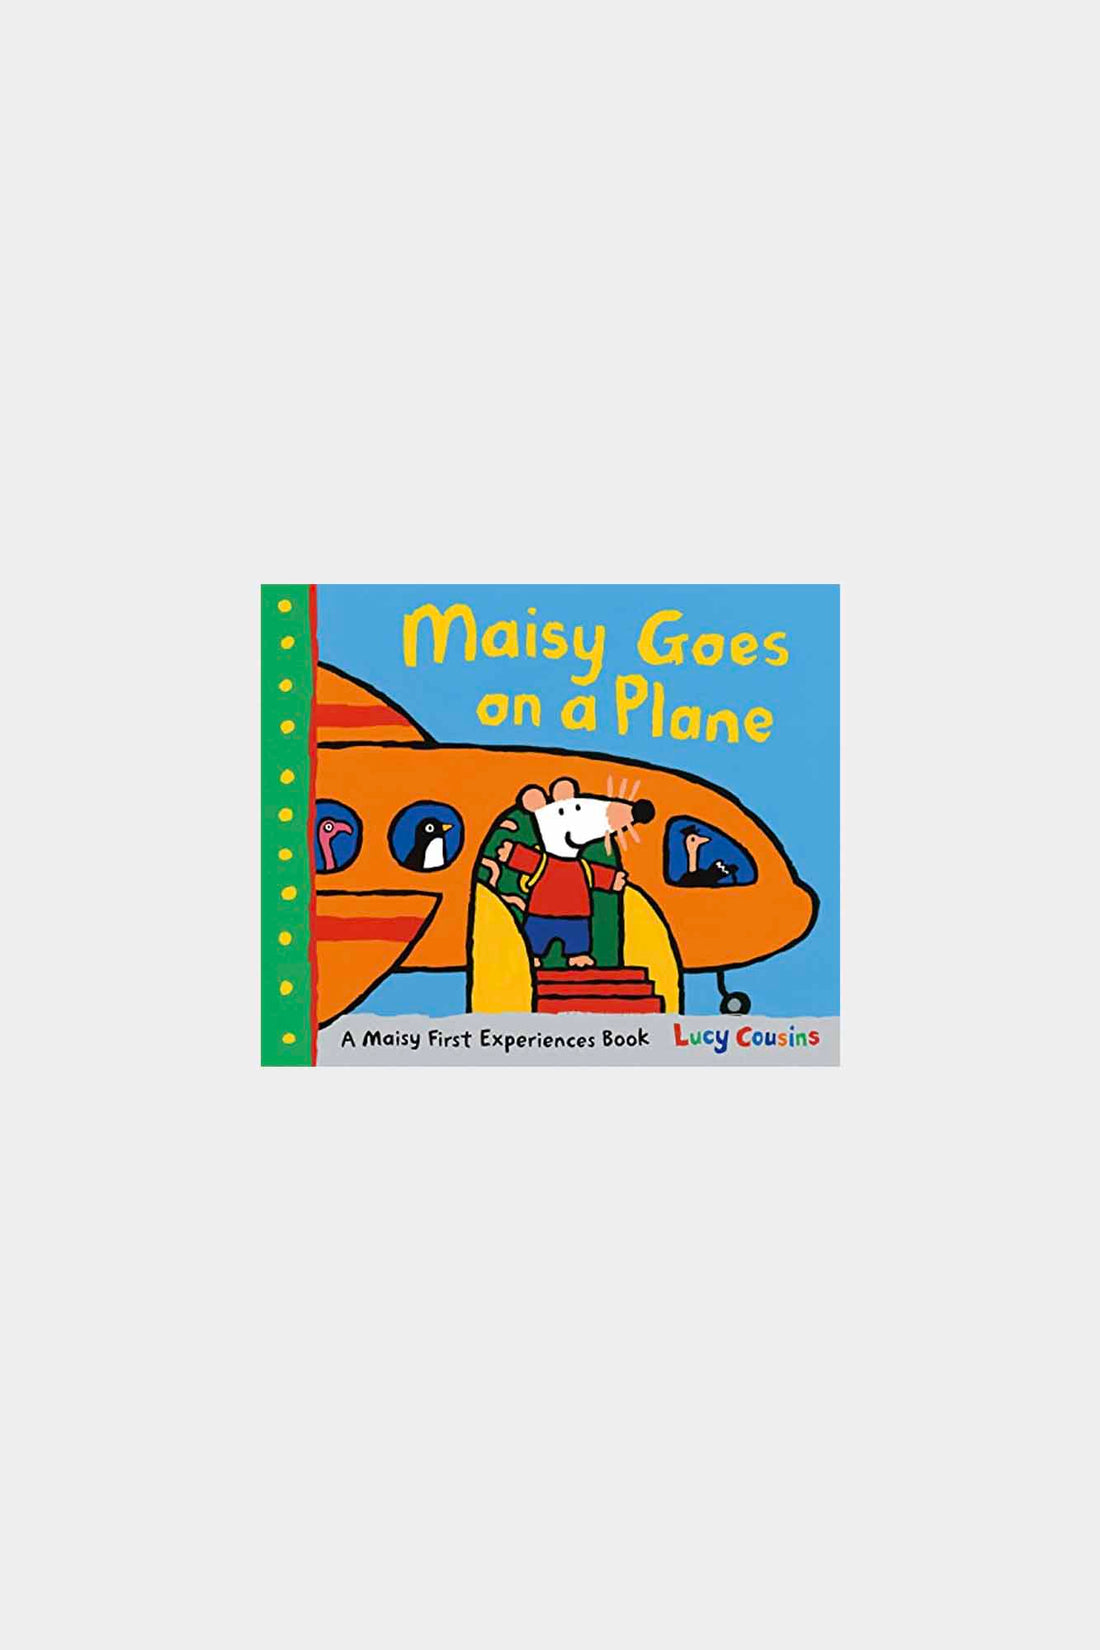 Maisy Goes on a Plane: A Maisy First Experiences Book